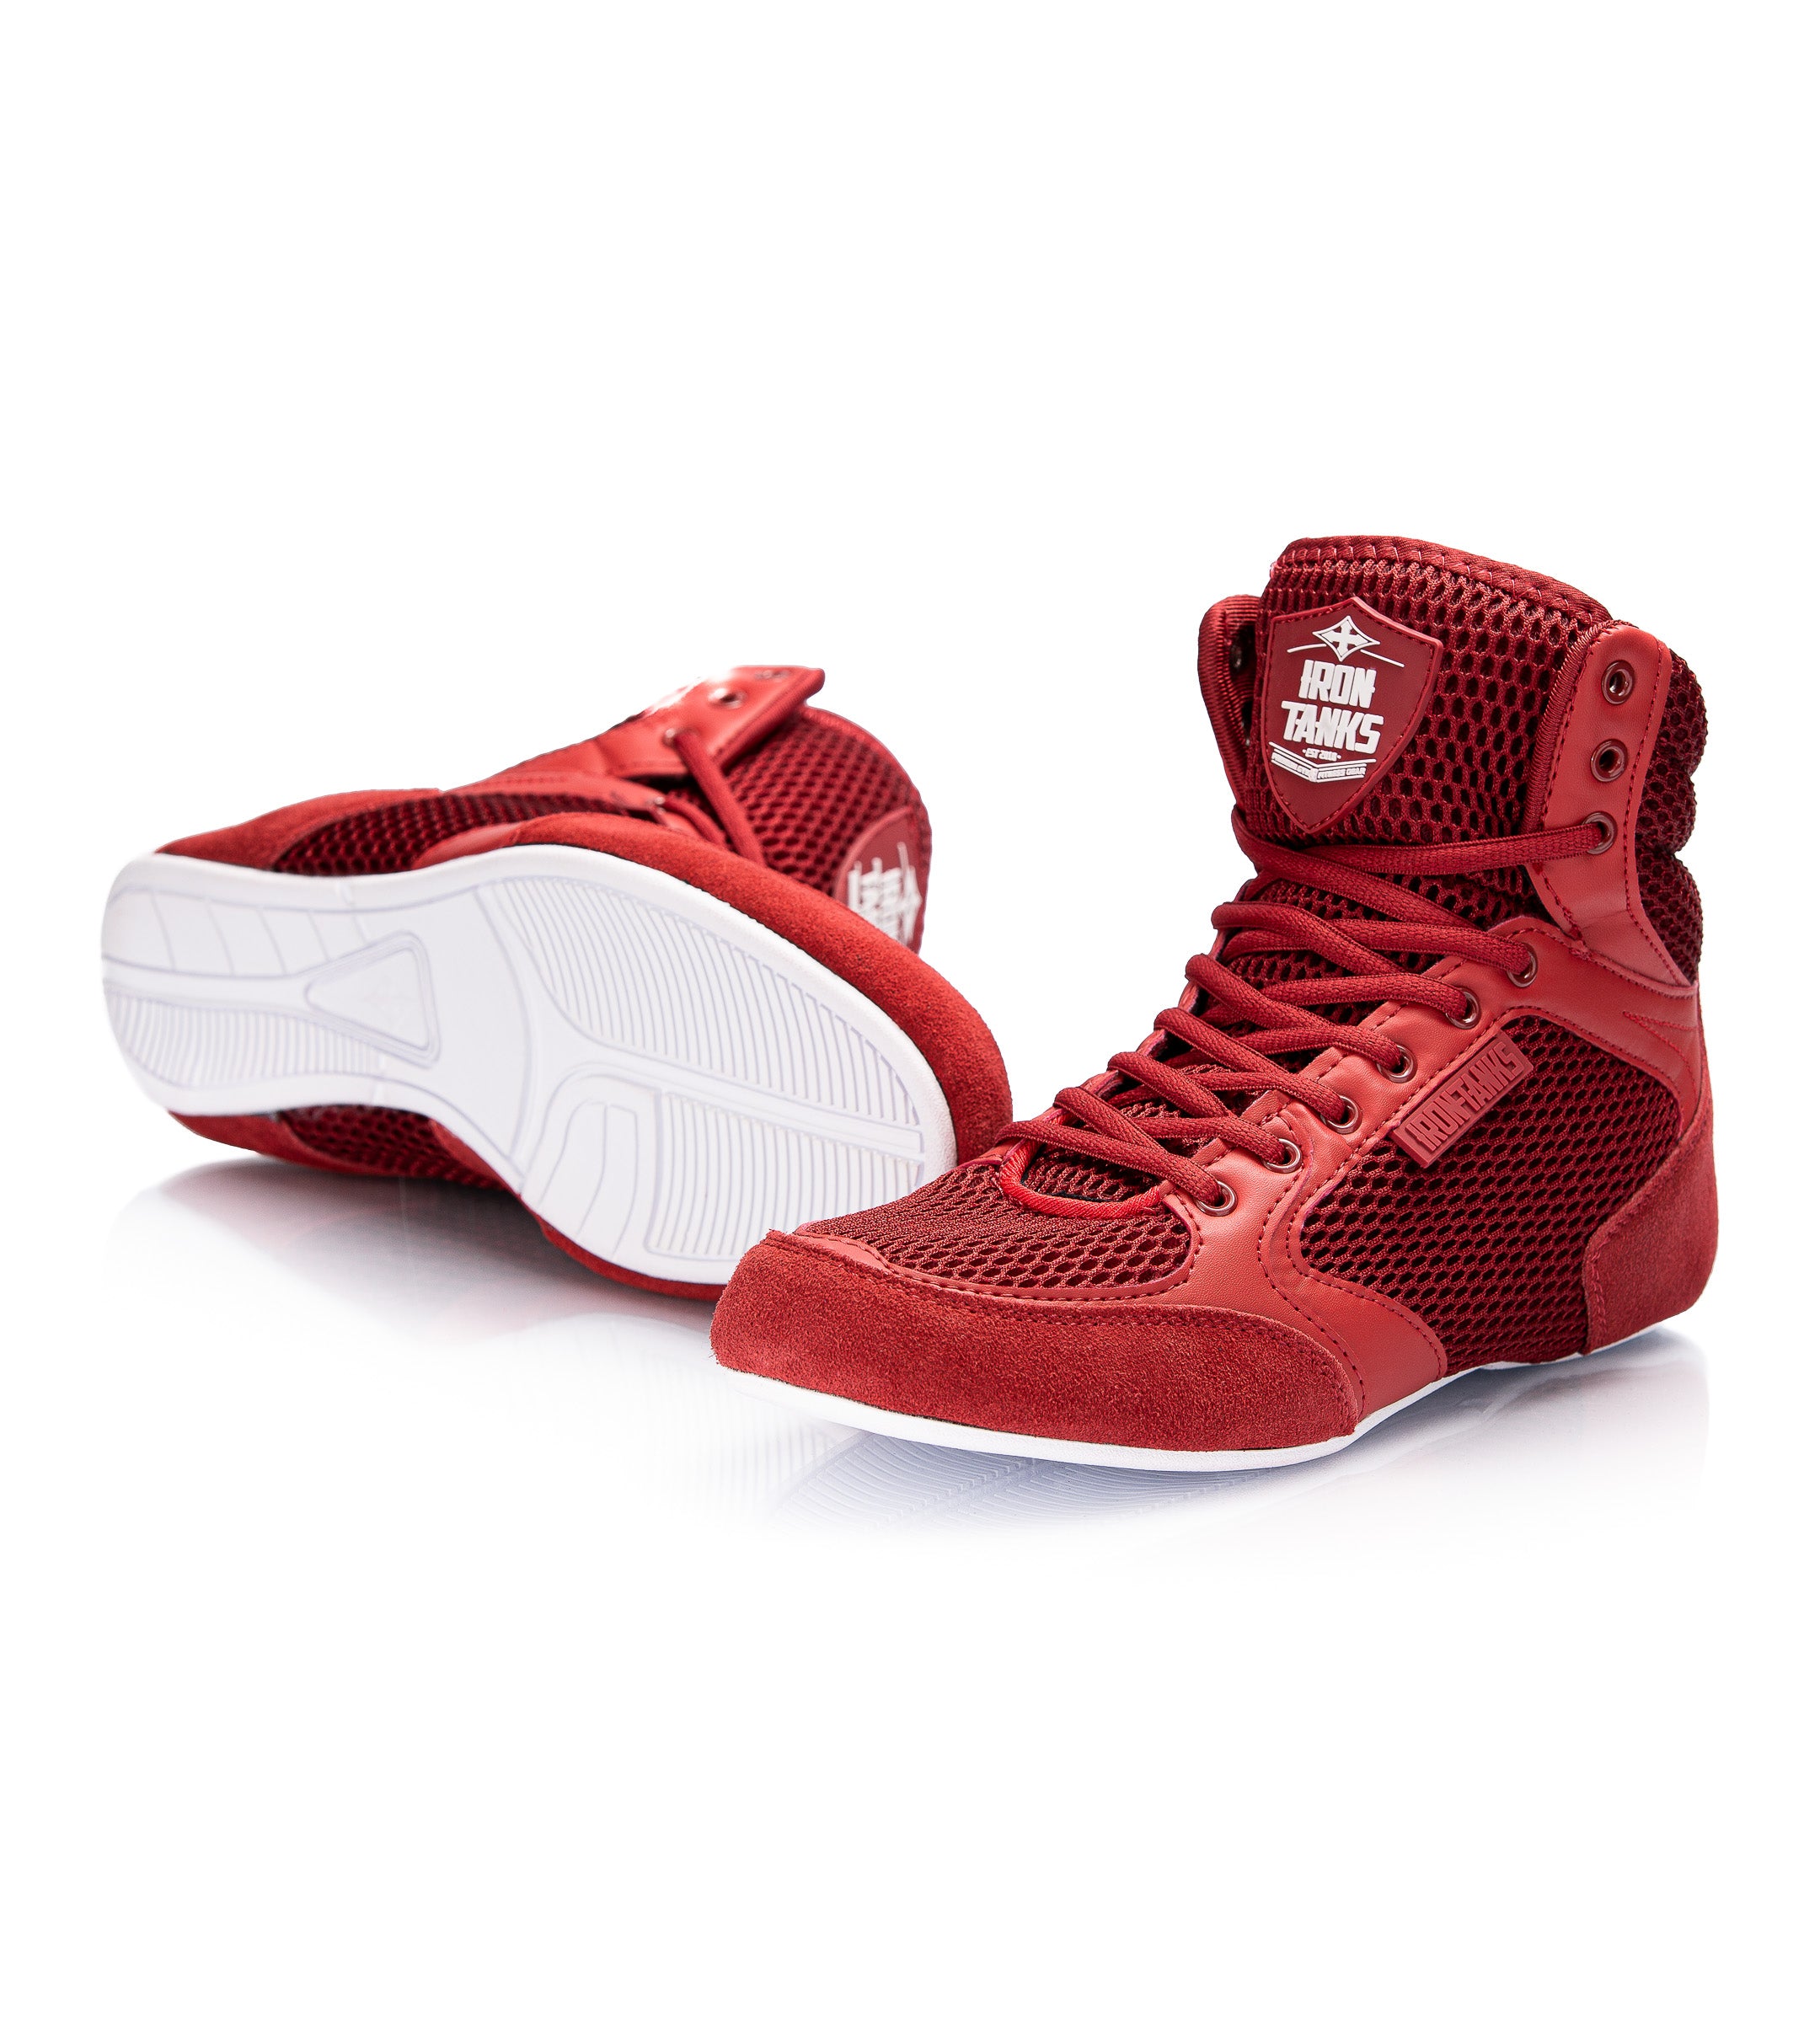 Titan III Gym Shoes Red | Weightlifting Bodybuilding Iron Tanks